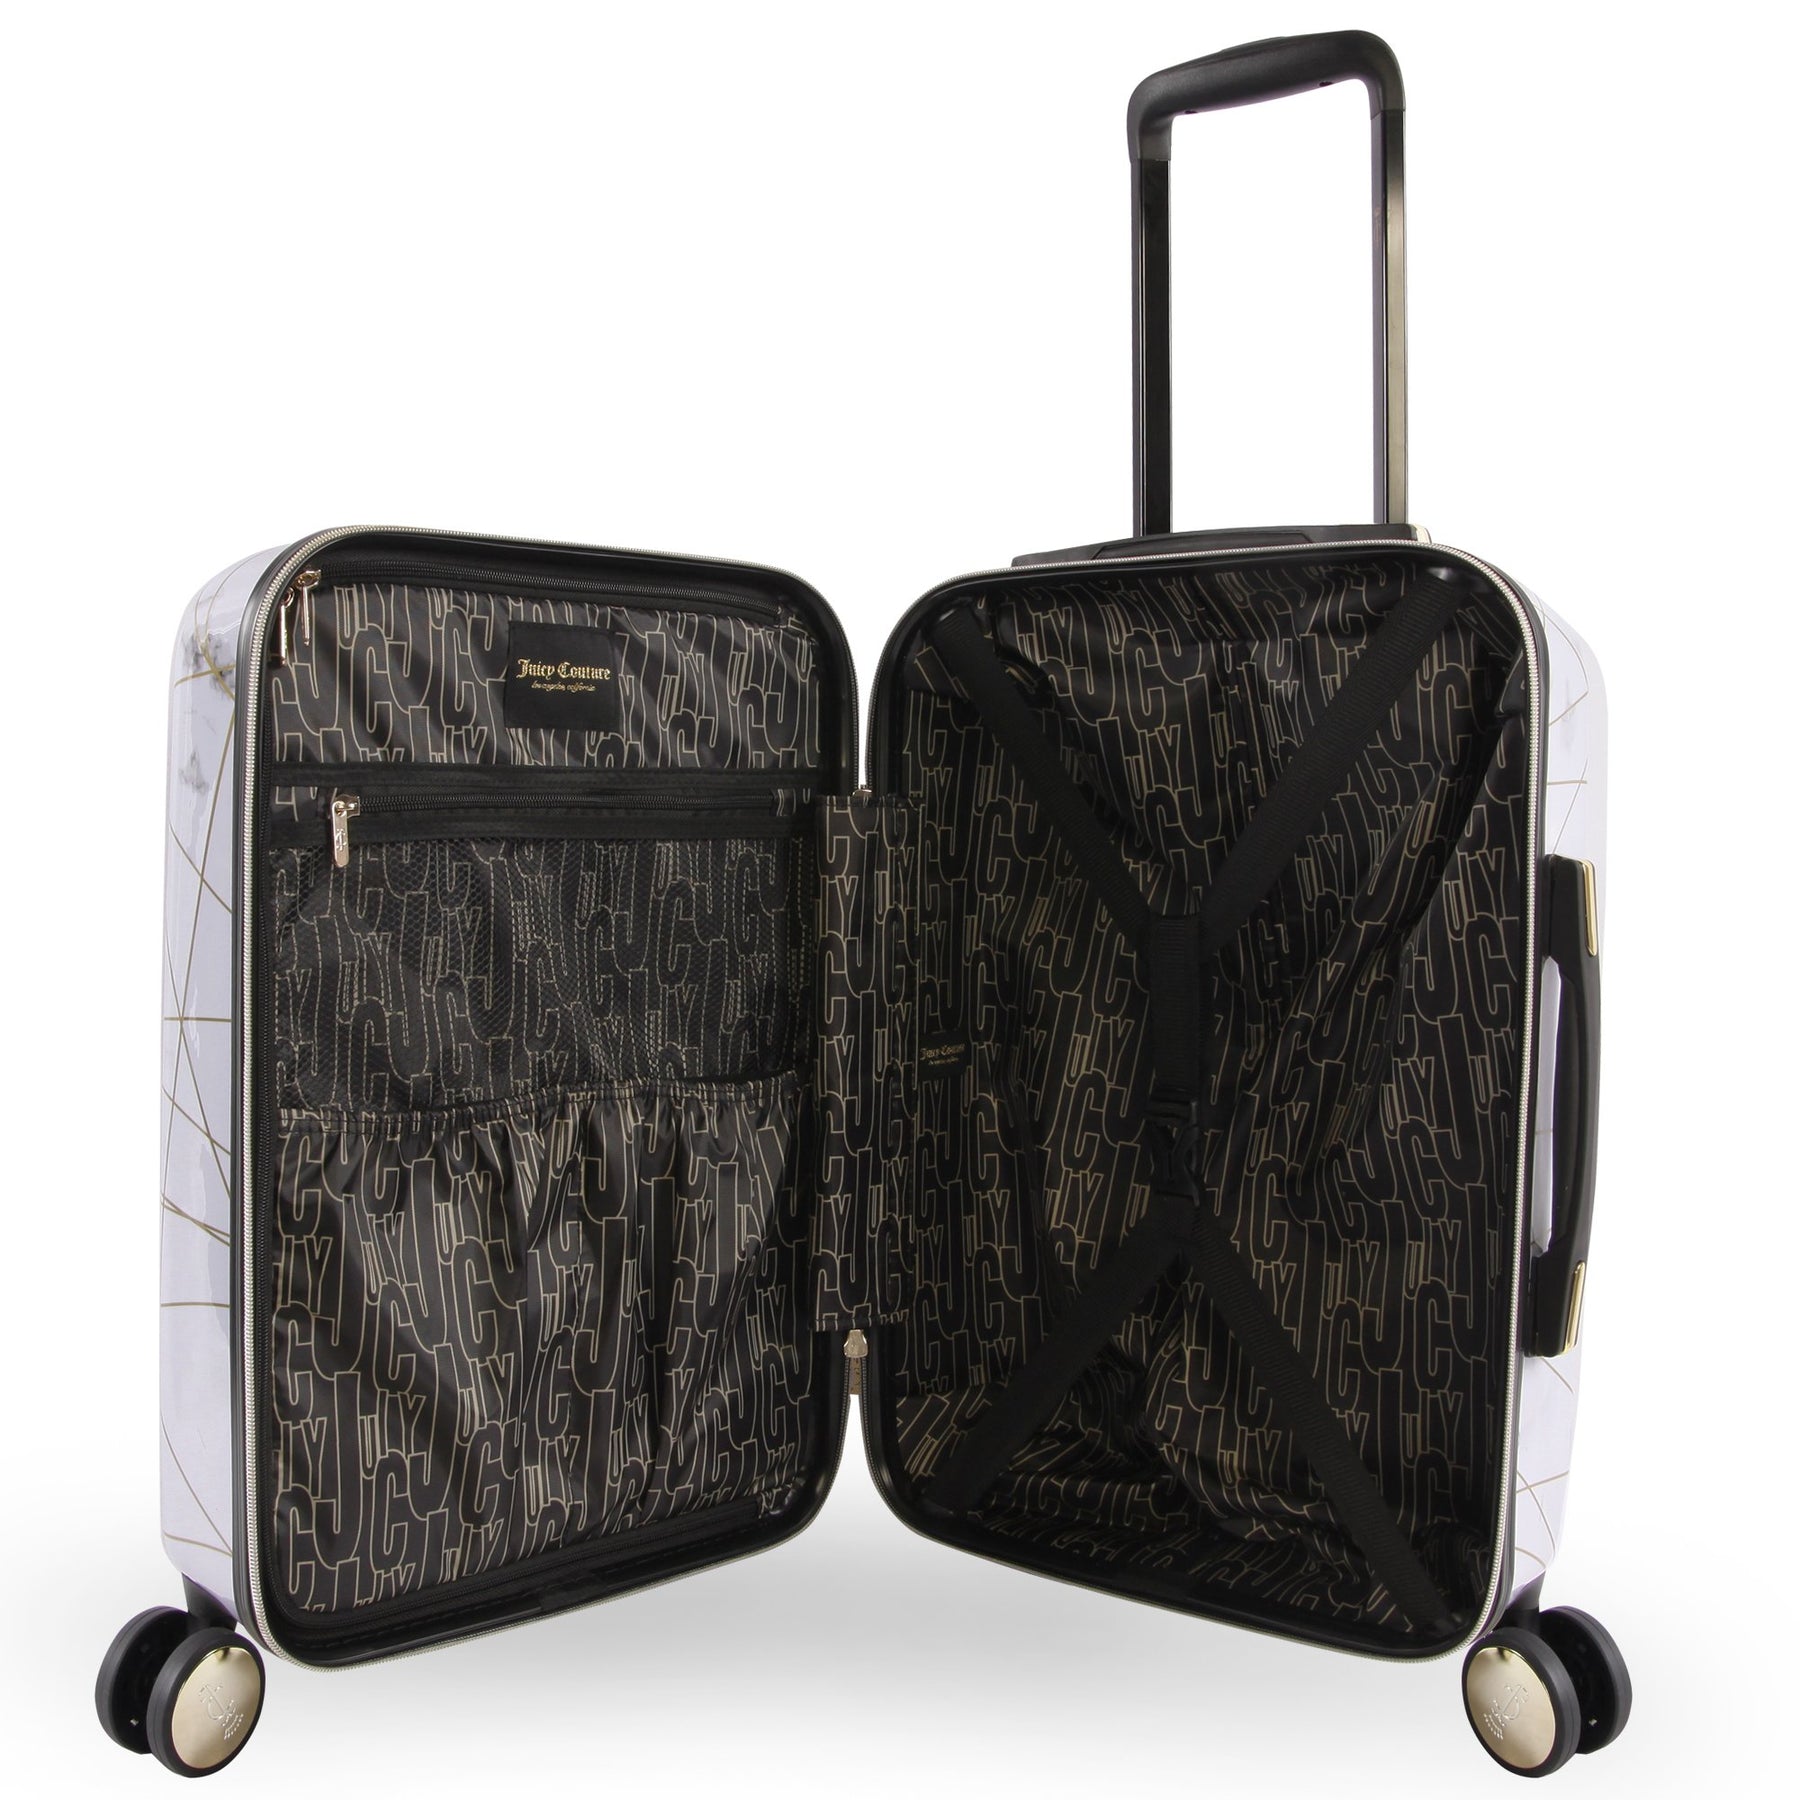 Carry-On Hardside Spinner Luggage - Juicy Couture